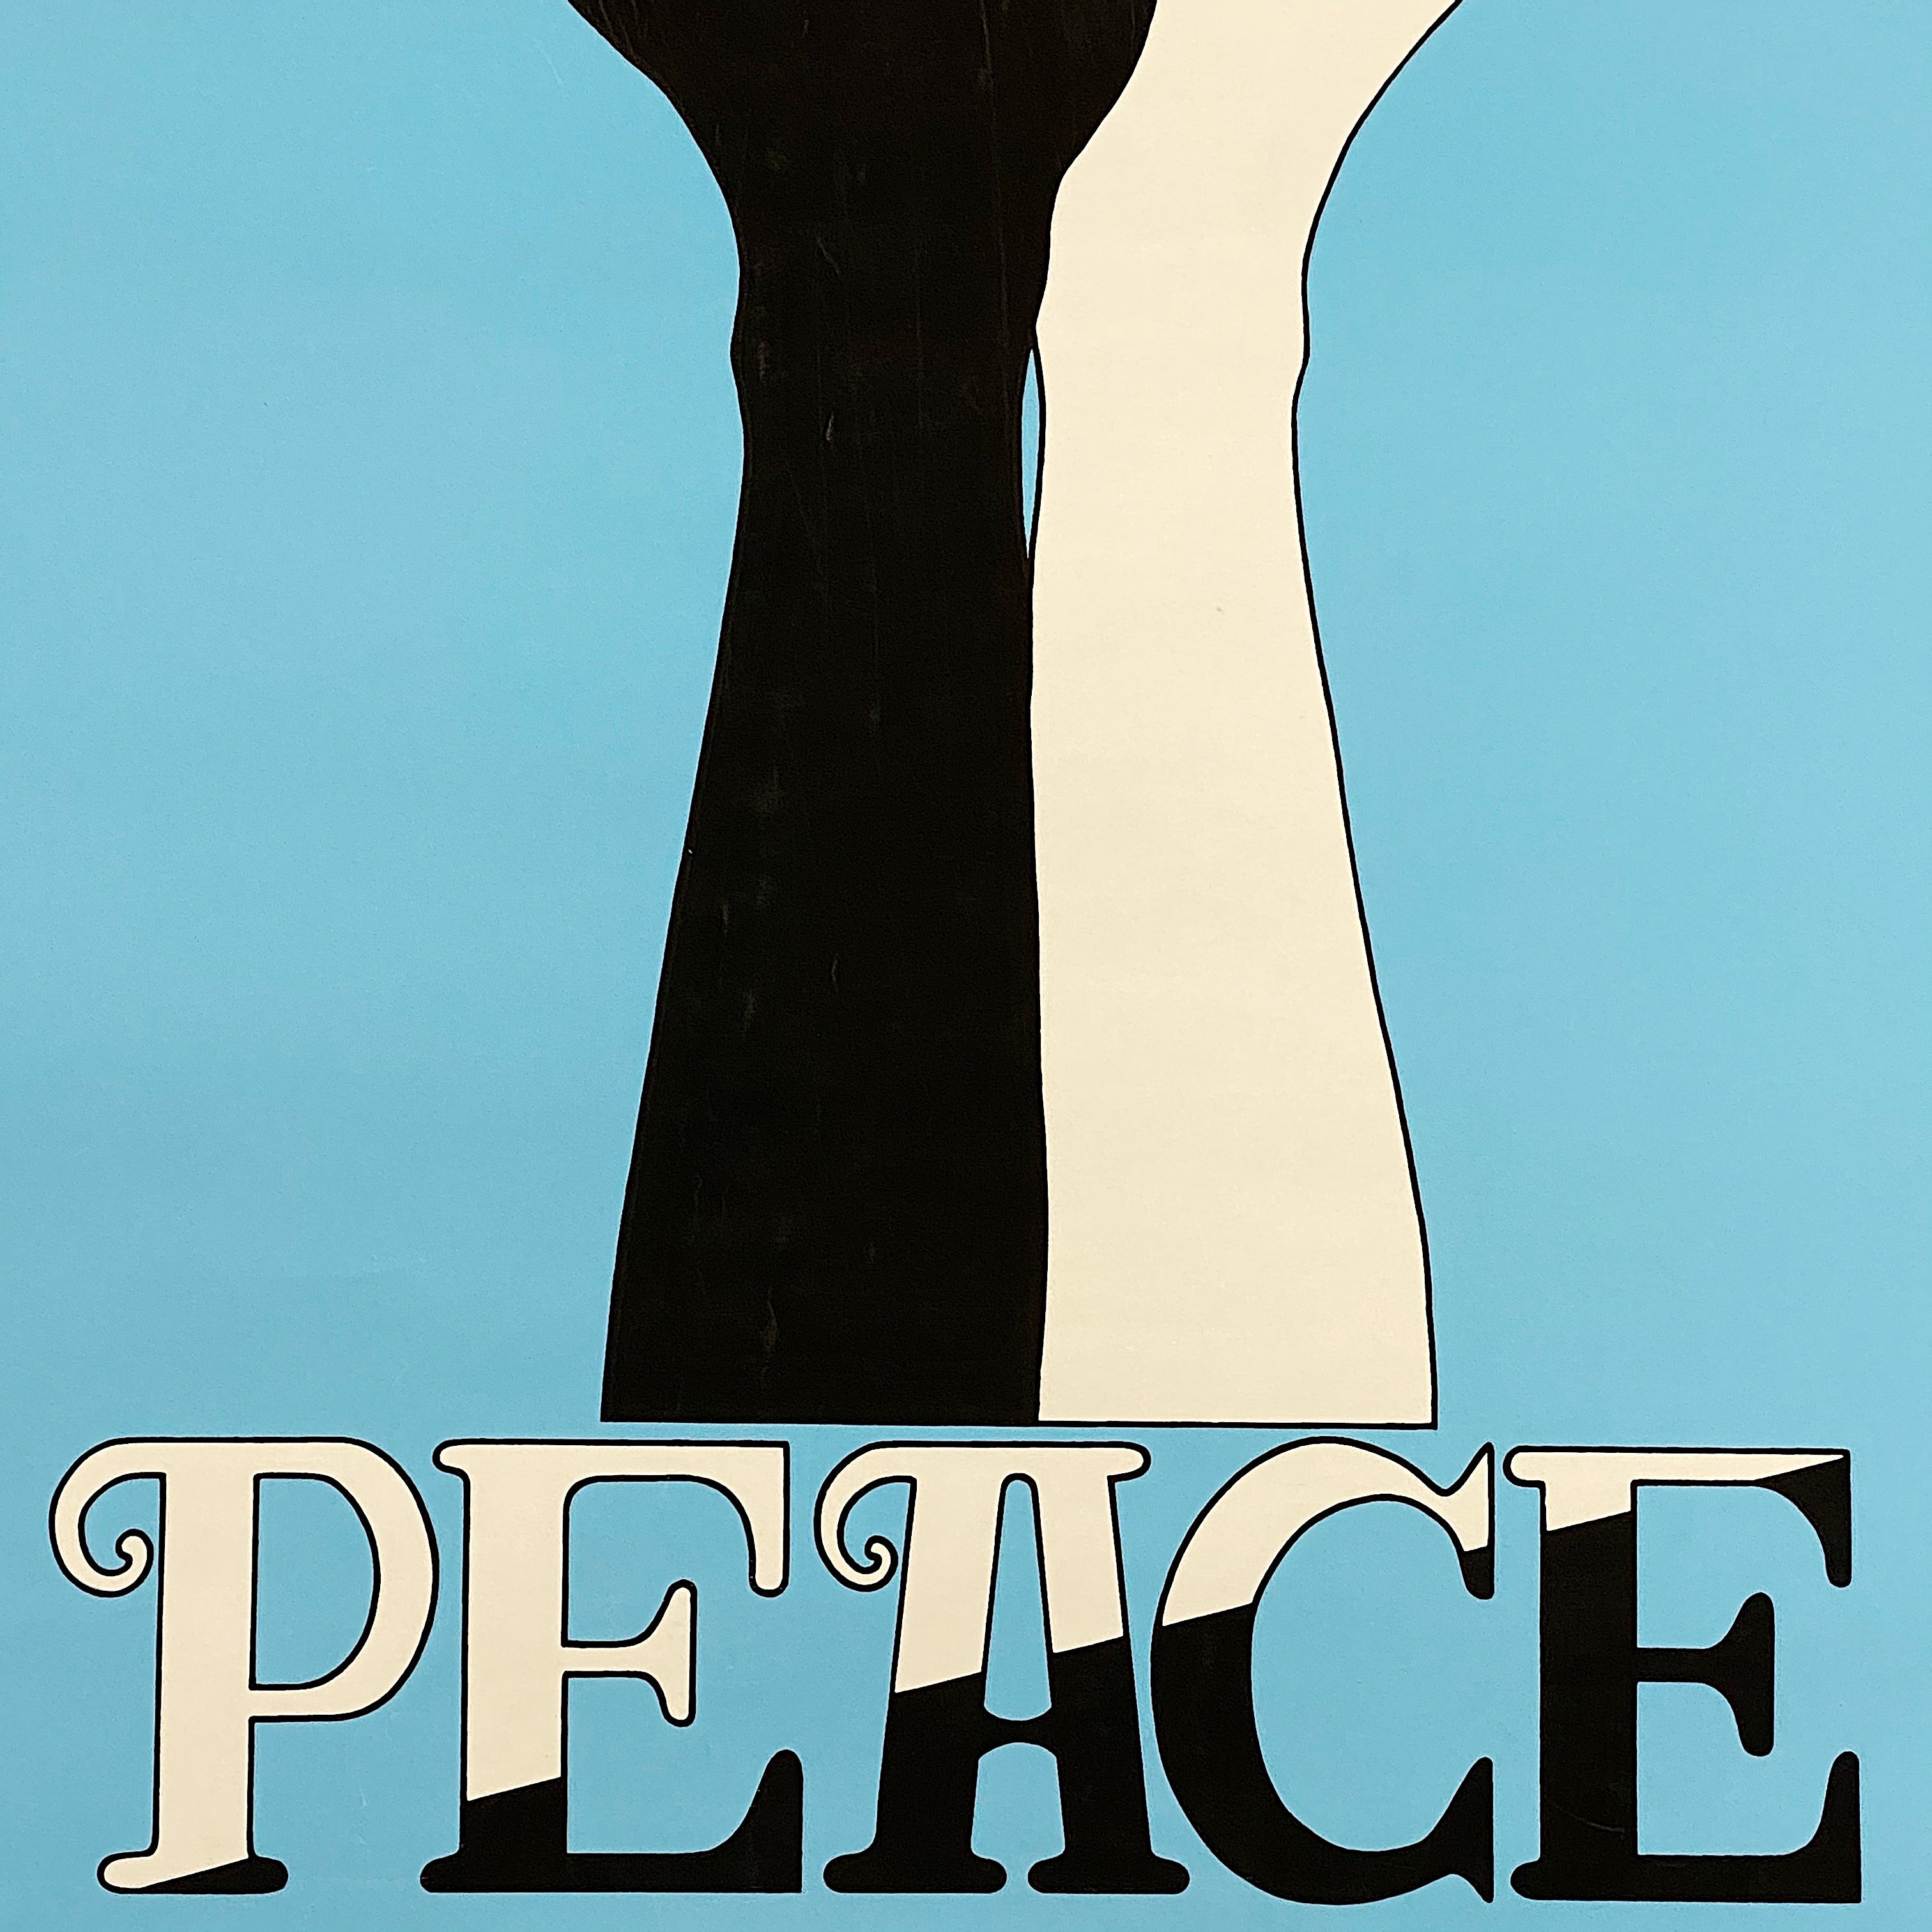 1960s Peace Poster with Dove and Hands | Civil Rights Blacklight